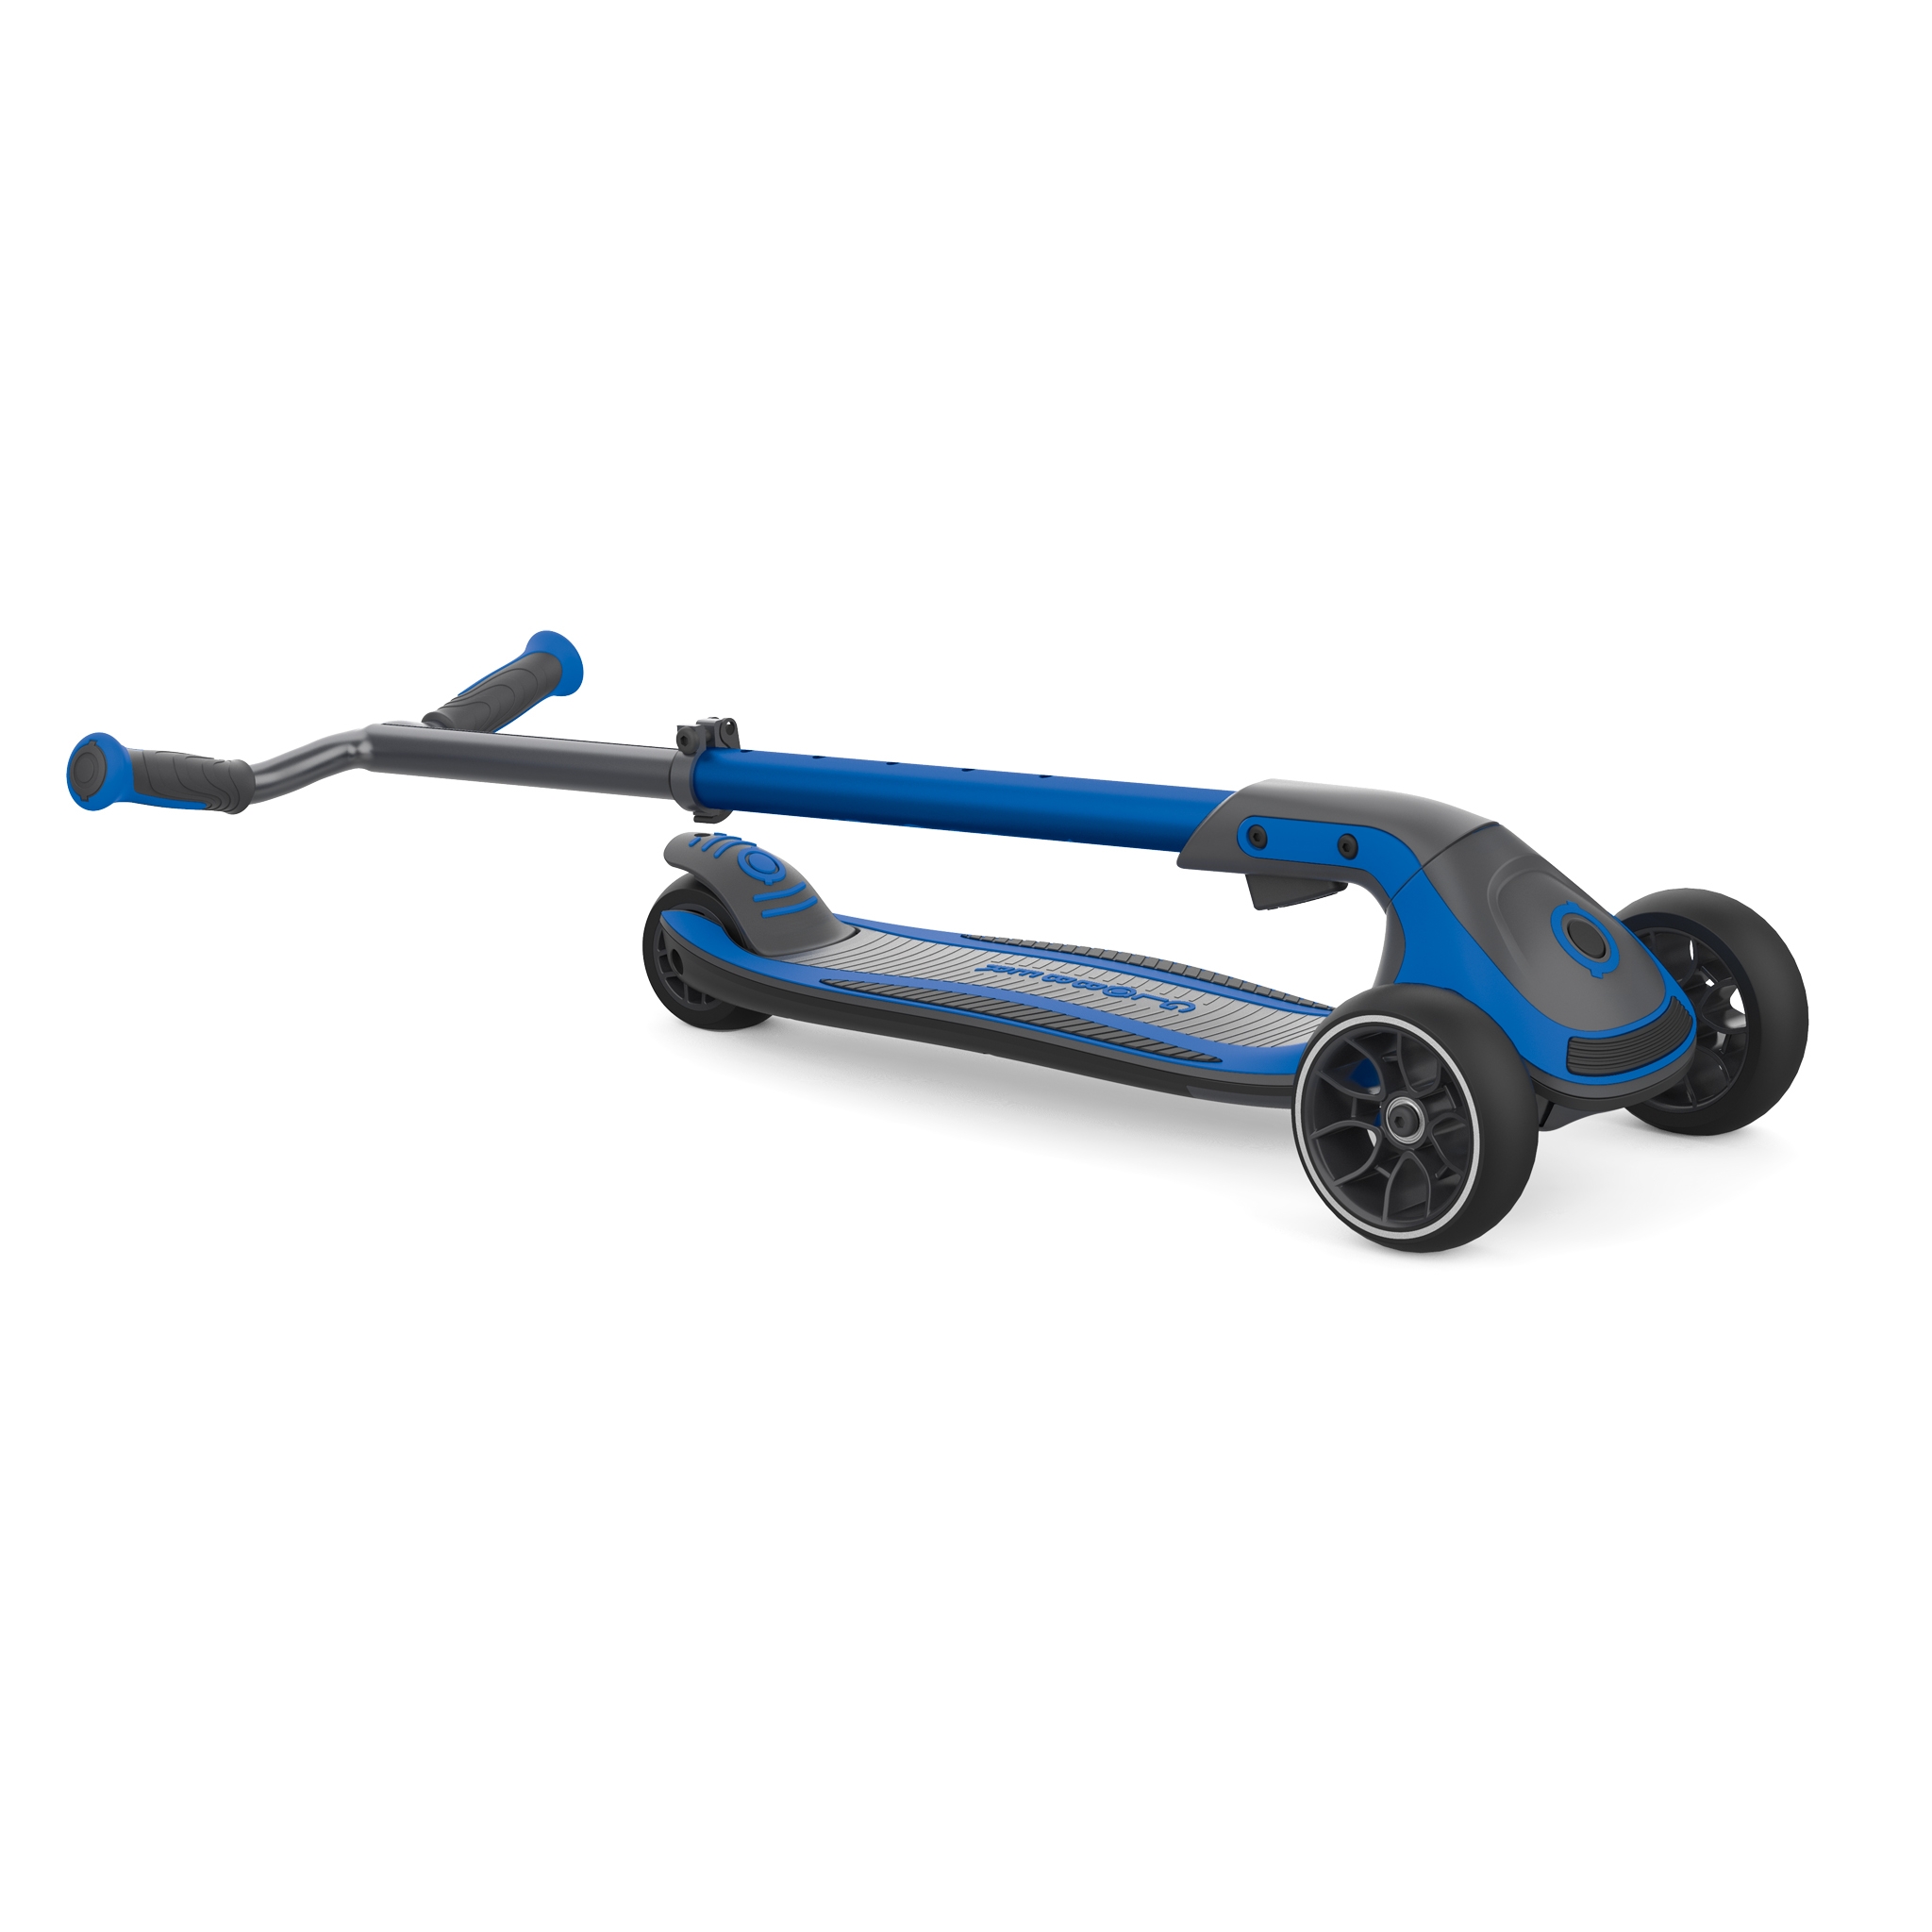 3 wheel foldable scooter for kids, teens and adults - Globber ULTIMUM 4